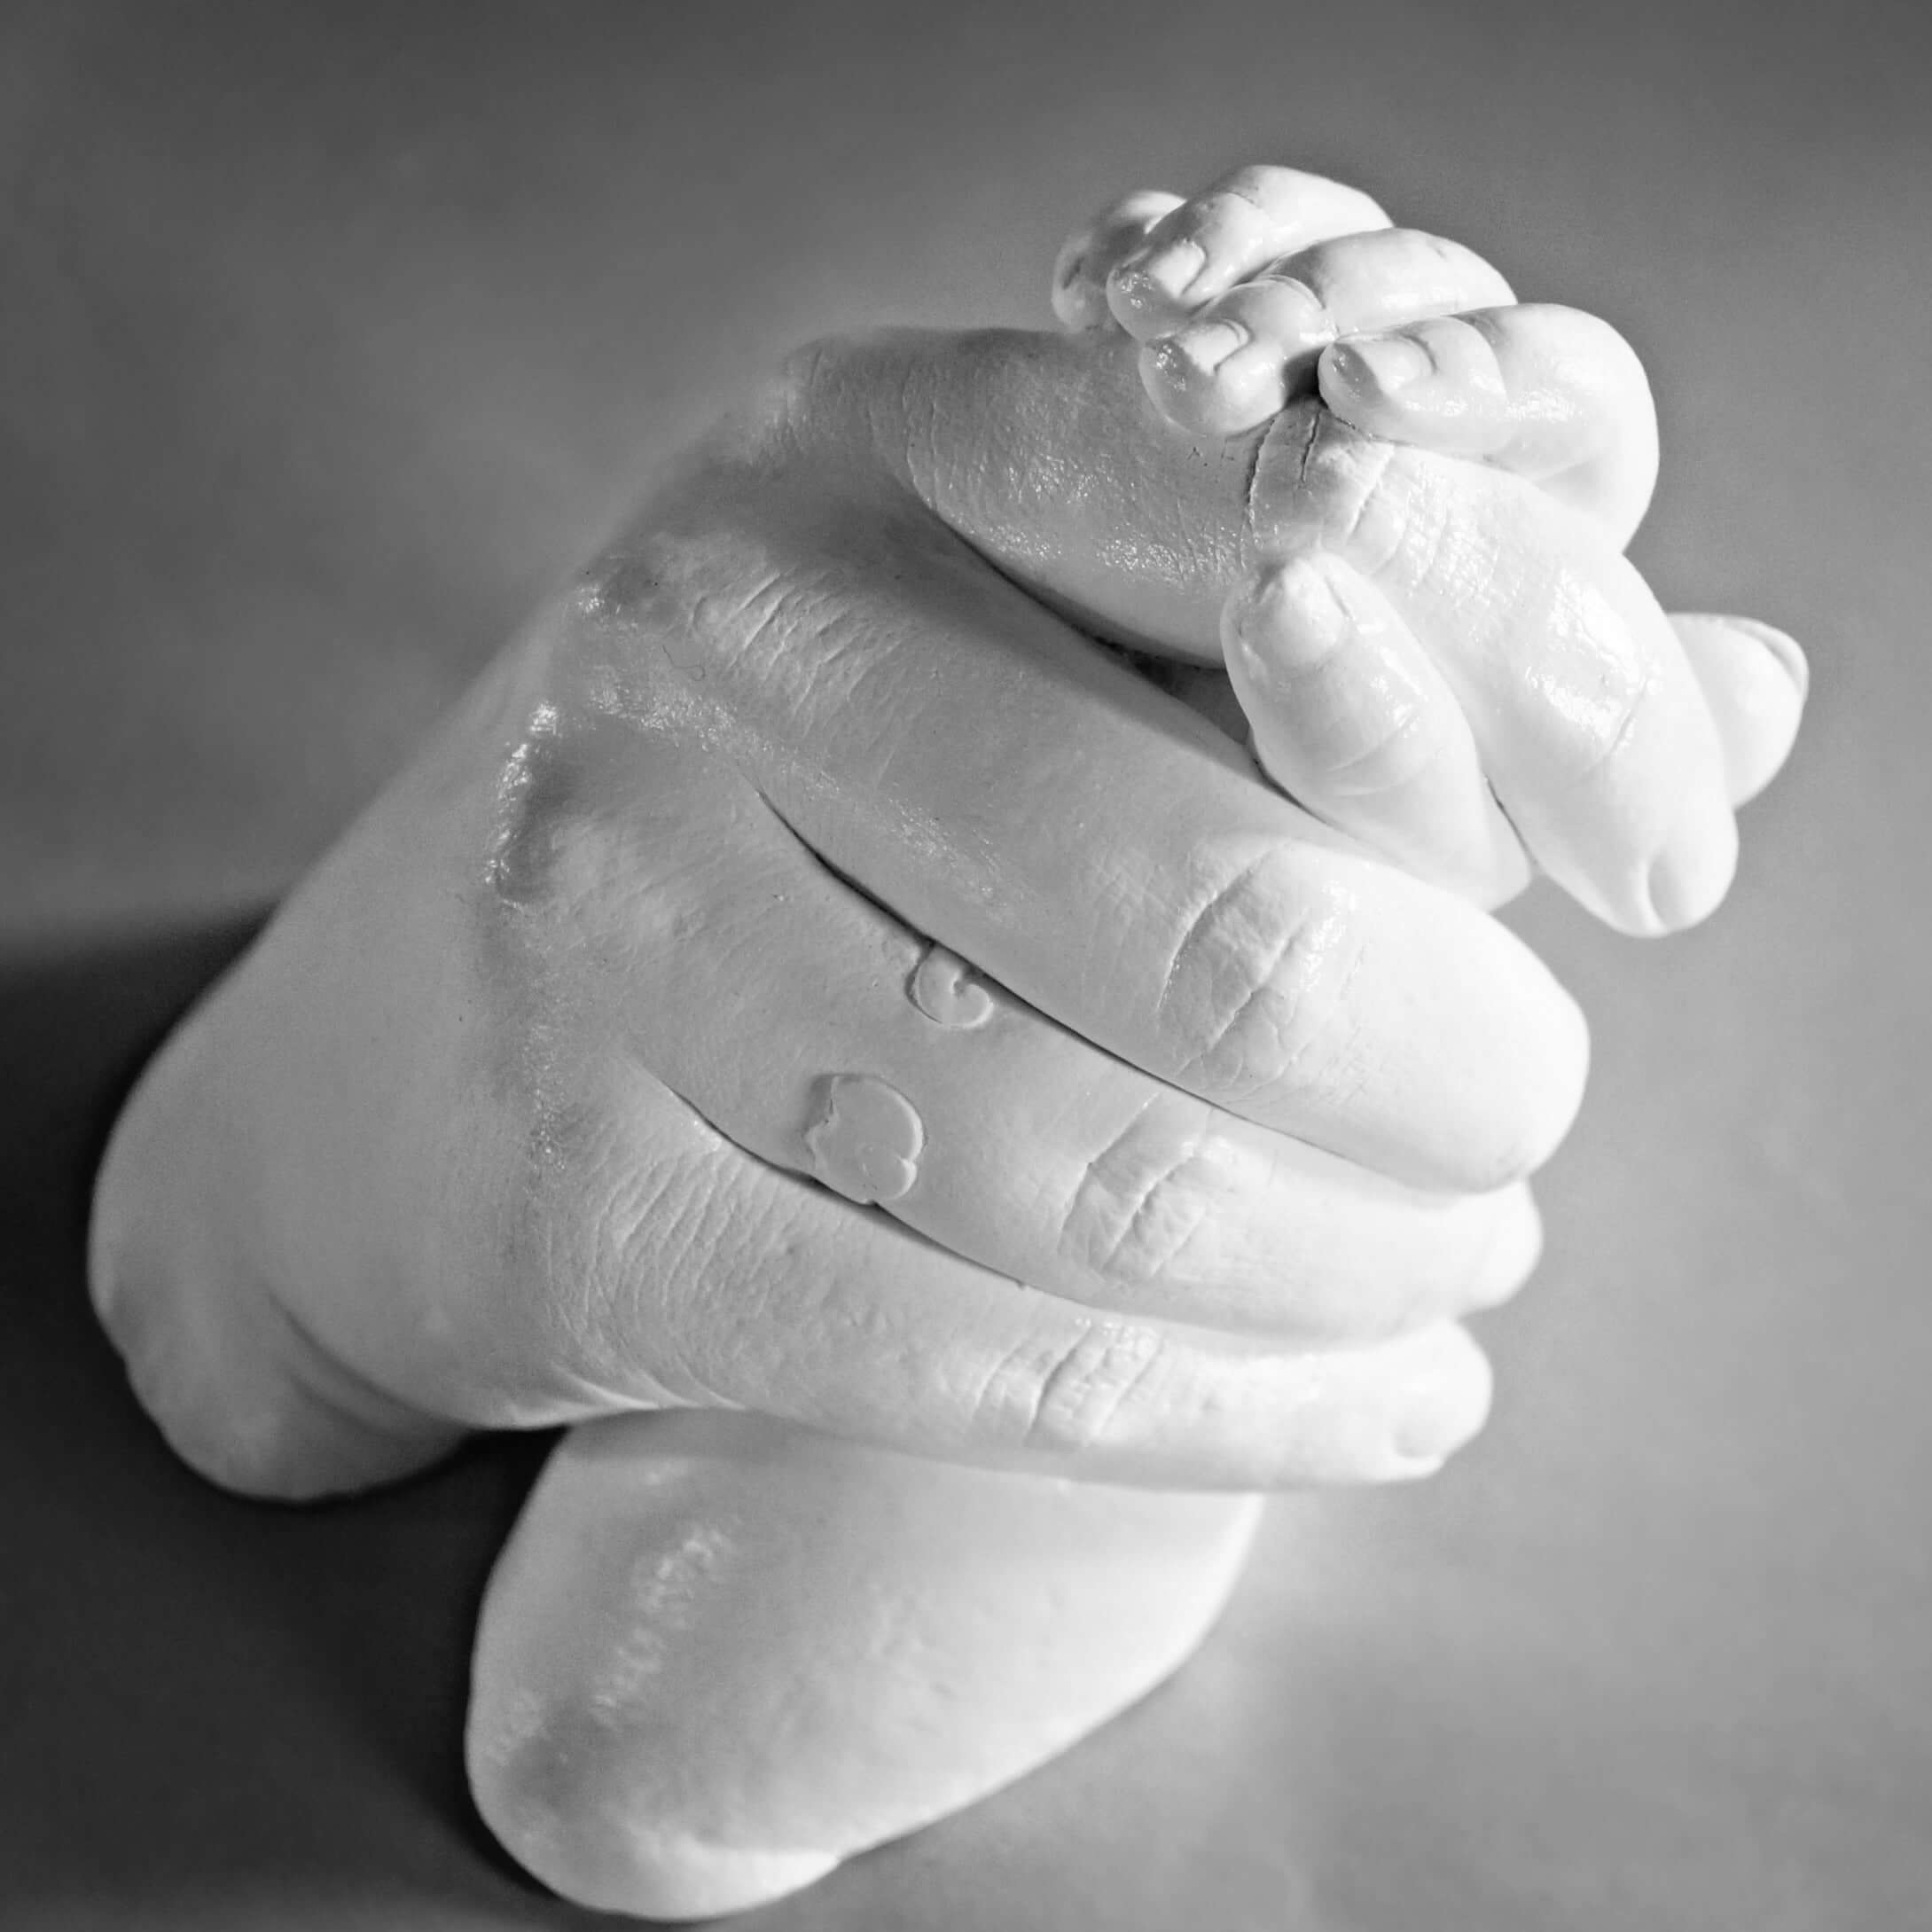 3D Mama & Baby Handabdruck - Veredelung & Lackierung - Atelier Body-pArts